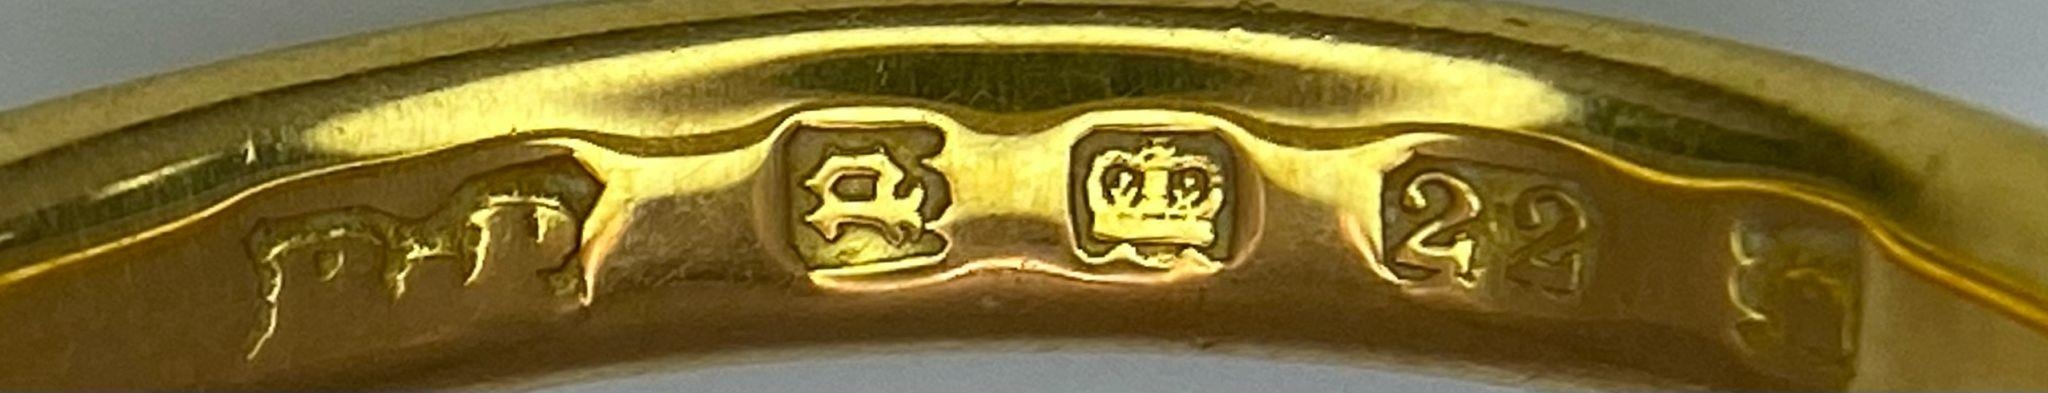 A Vintage 22k Yellow Gold Band Ring. 3mm width. Size L. 2.85g weight. Full UK hallmarks. - Image 4 of 4